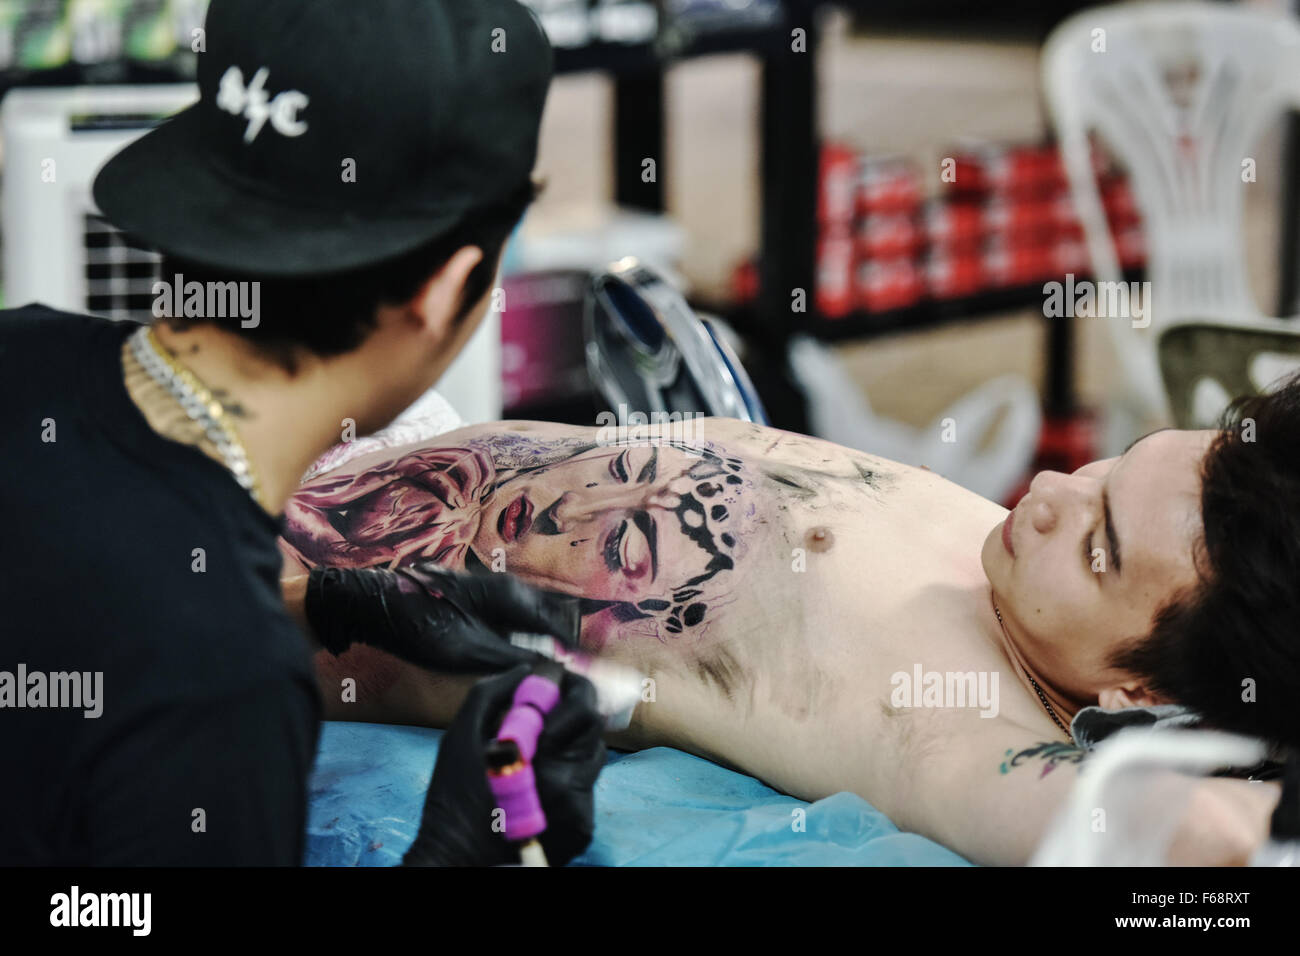 Bangkok, Thailand. 14th Nov, 2015. A tattoo artist works on a pattern on a man's chest during the MBK Tattoo Contest in Bangkok, Thailand, Nov. 14, 2015. Hundreds of tattoo fans gather in Bangkok on Saturday for the annual MBK Tattoo Contest, competing in 16 styled events including small job, old school, new school, realistic and tribal. © Li Mangmang/Xinhua/Alamy Live News Stock Photo